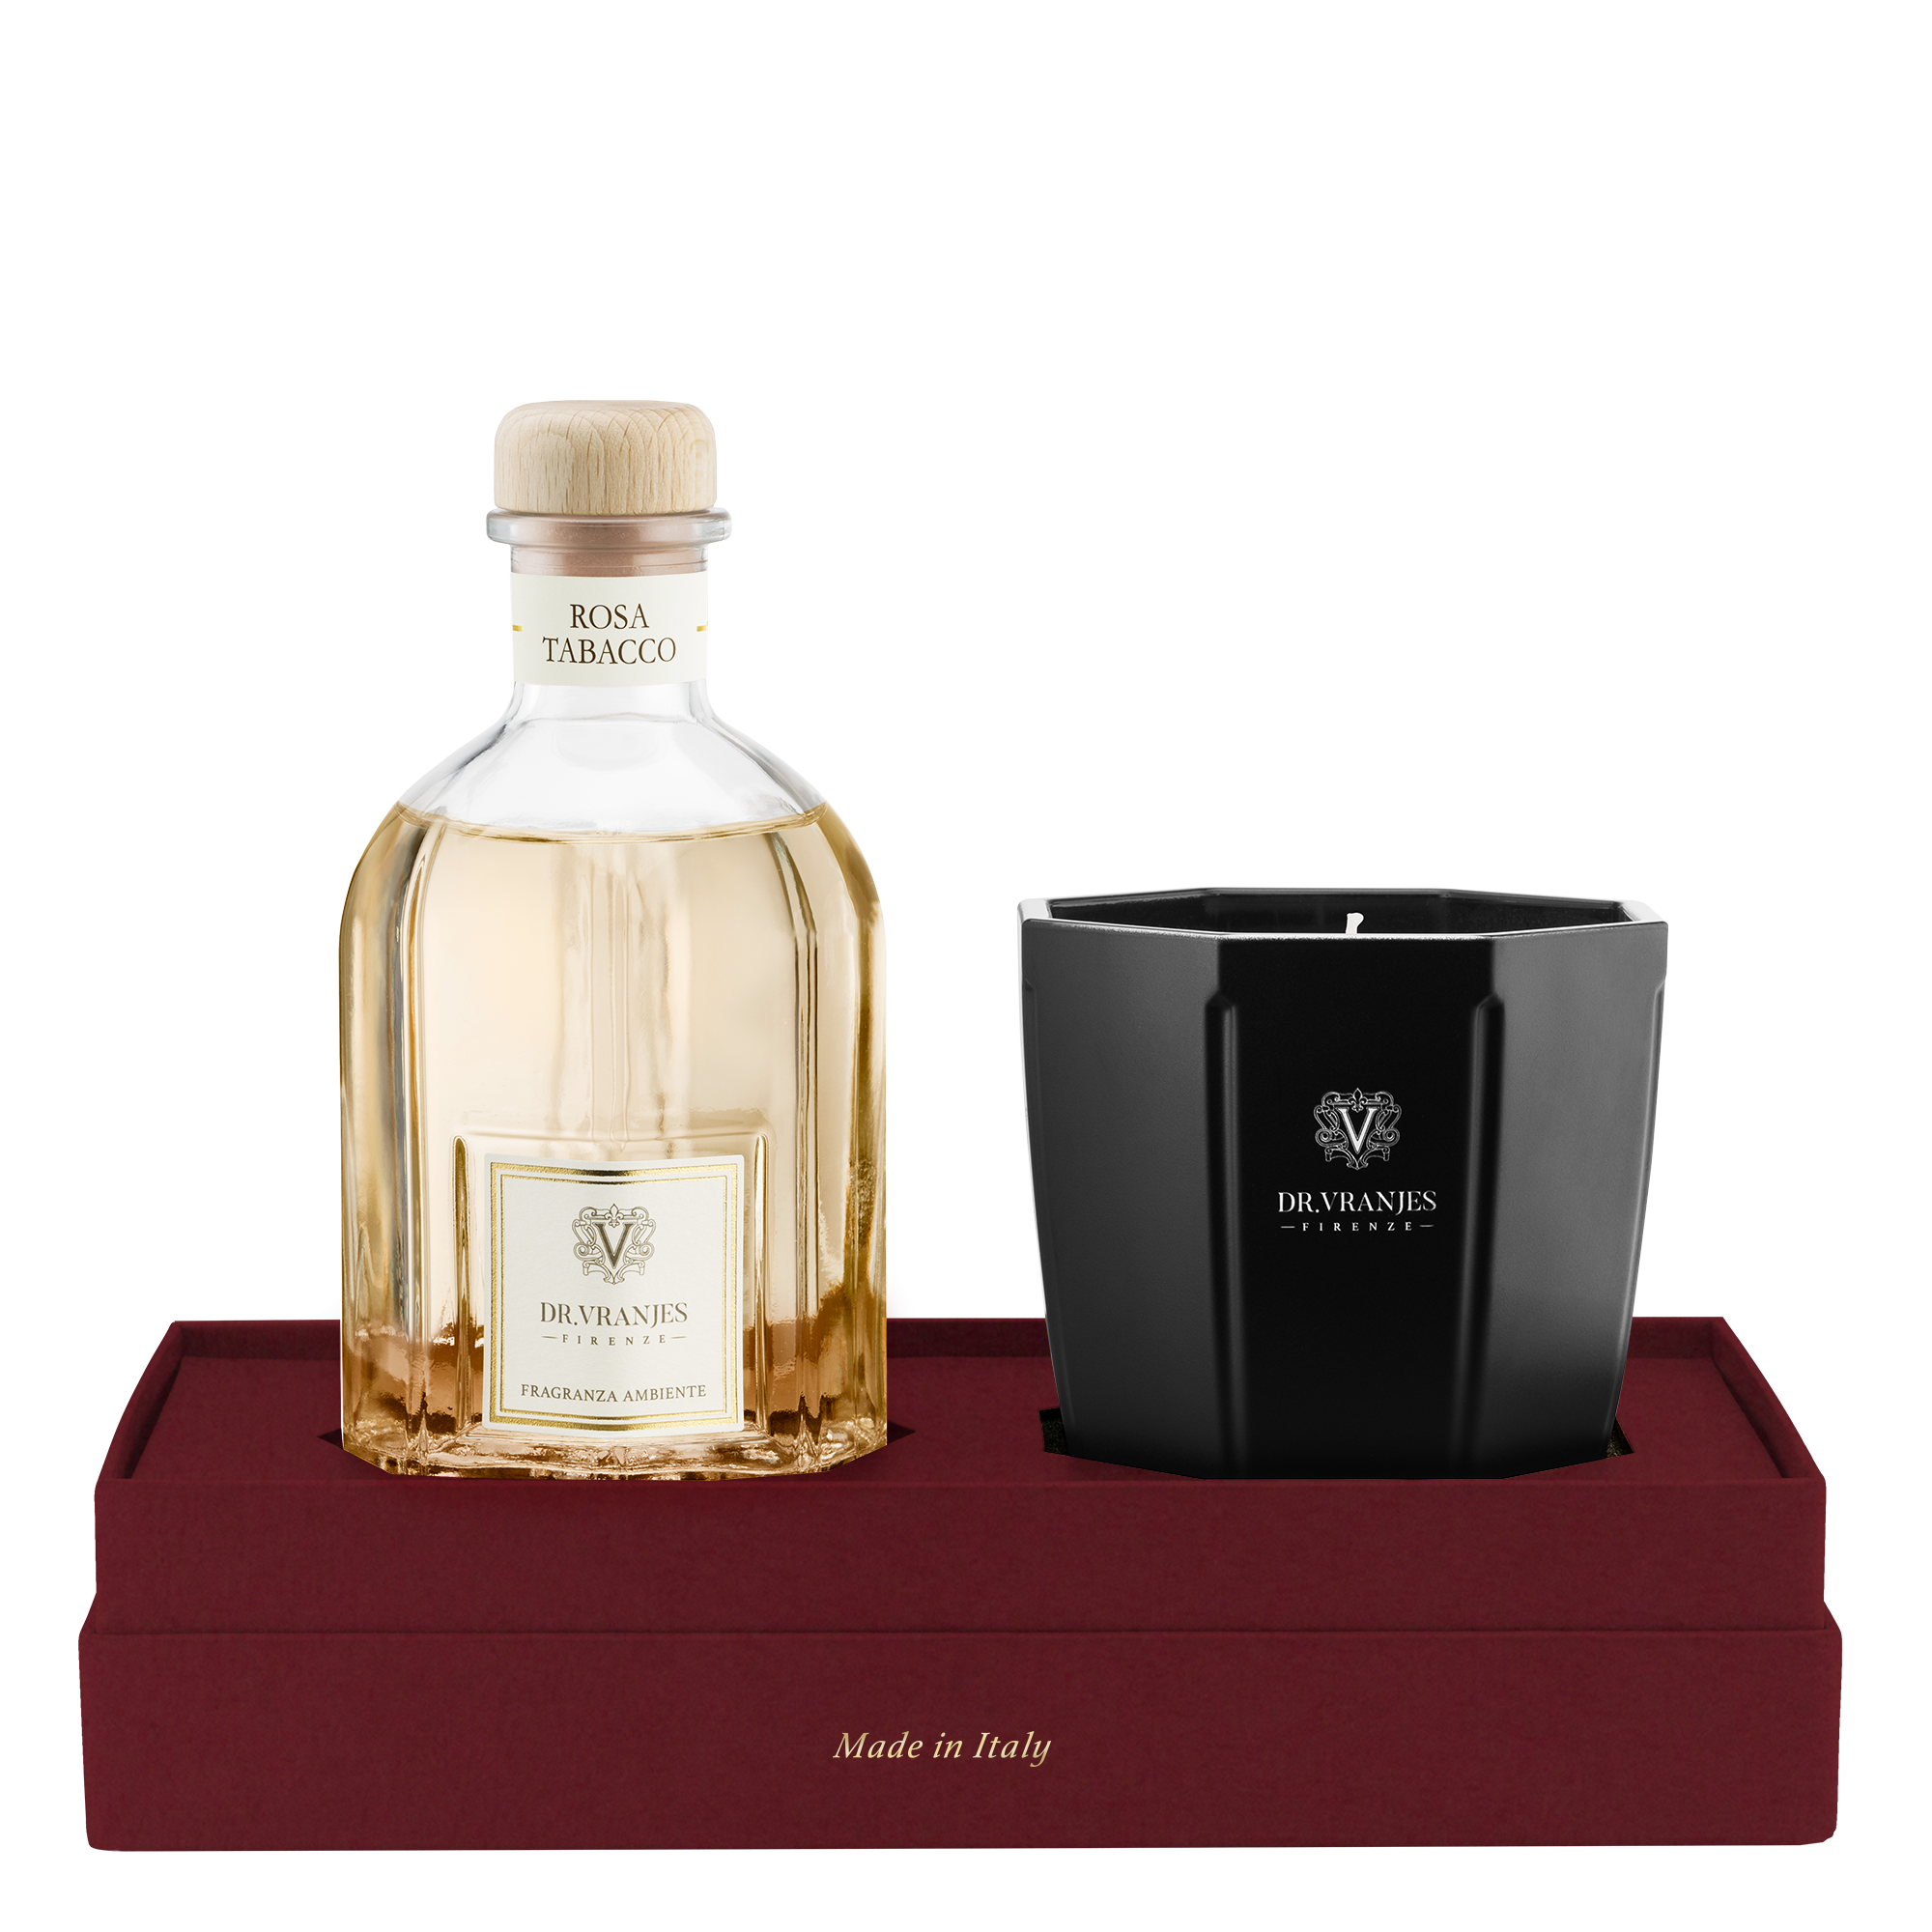 Special Edition Gift - Rosa Tabacco - 250ml Diffuser & 200g Candle